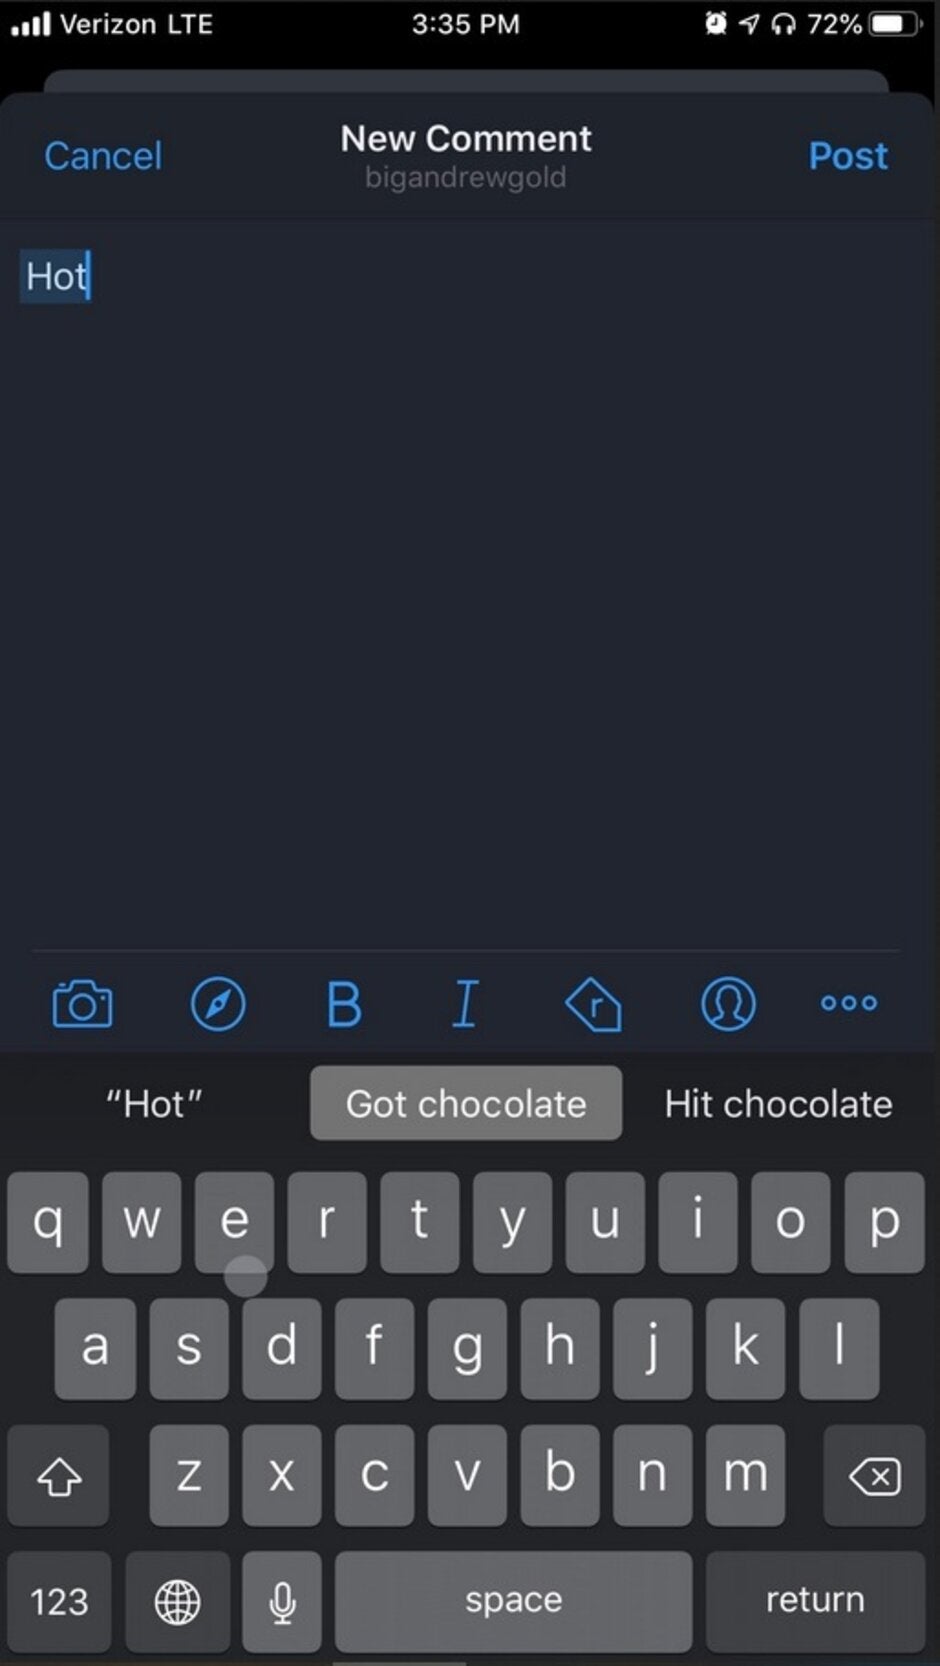 Several Apple iPhone users just can't seem to correctly swipe Hot Chocolate - The Apple iPhone has a problem with Hot Chocolate